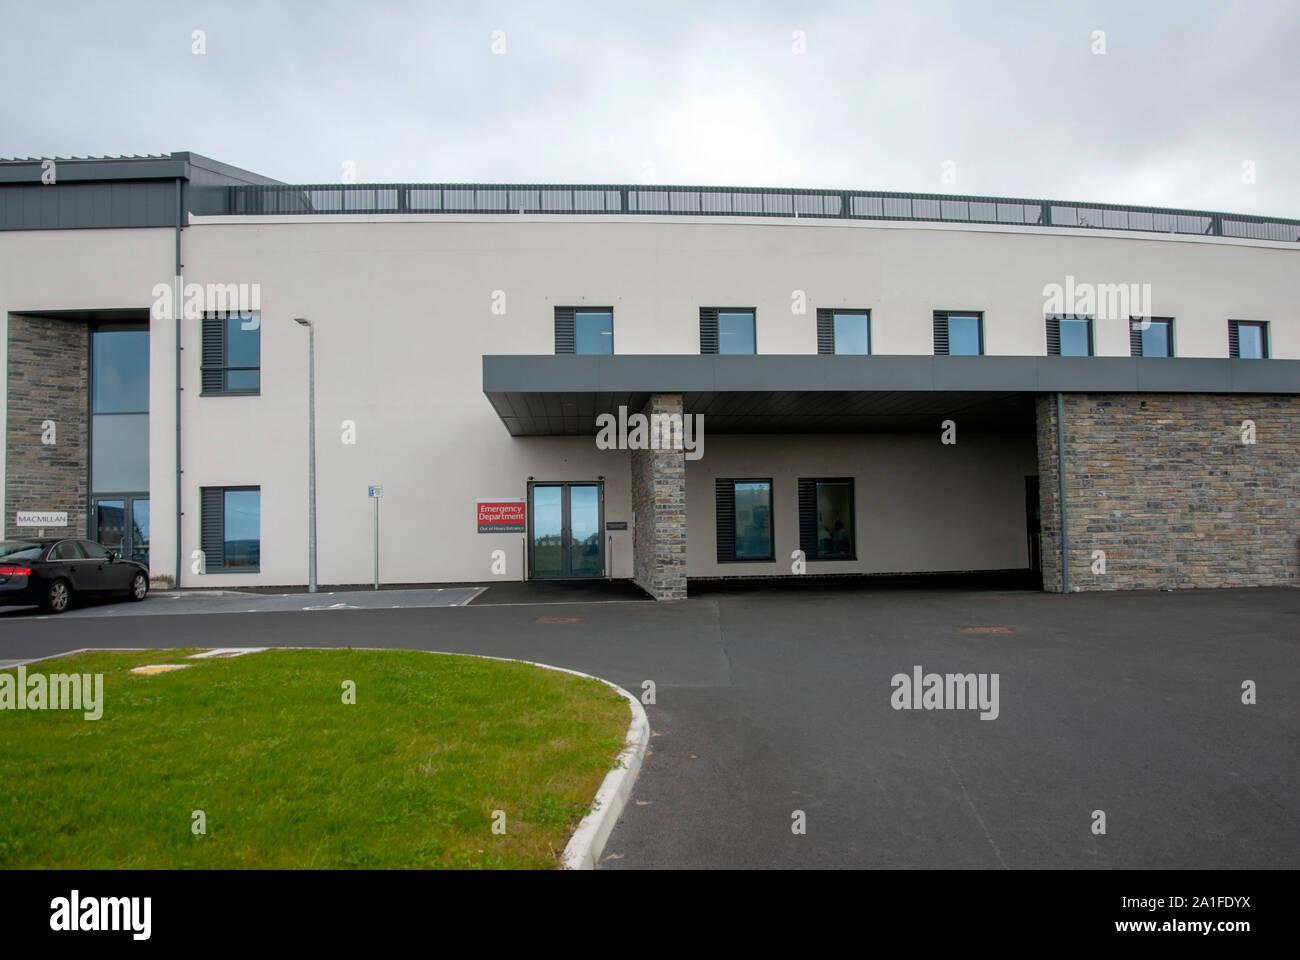 Accident & Emergency Entrance The New NHS Balfour Hospital Foreland Road Kirkwall Mainland The Orkney Isles Scotland United Kingdom exterior view A & Stock Photo